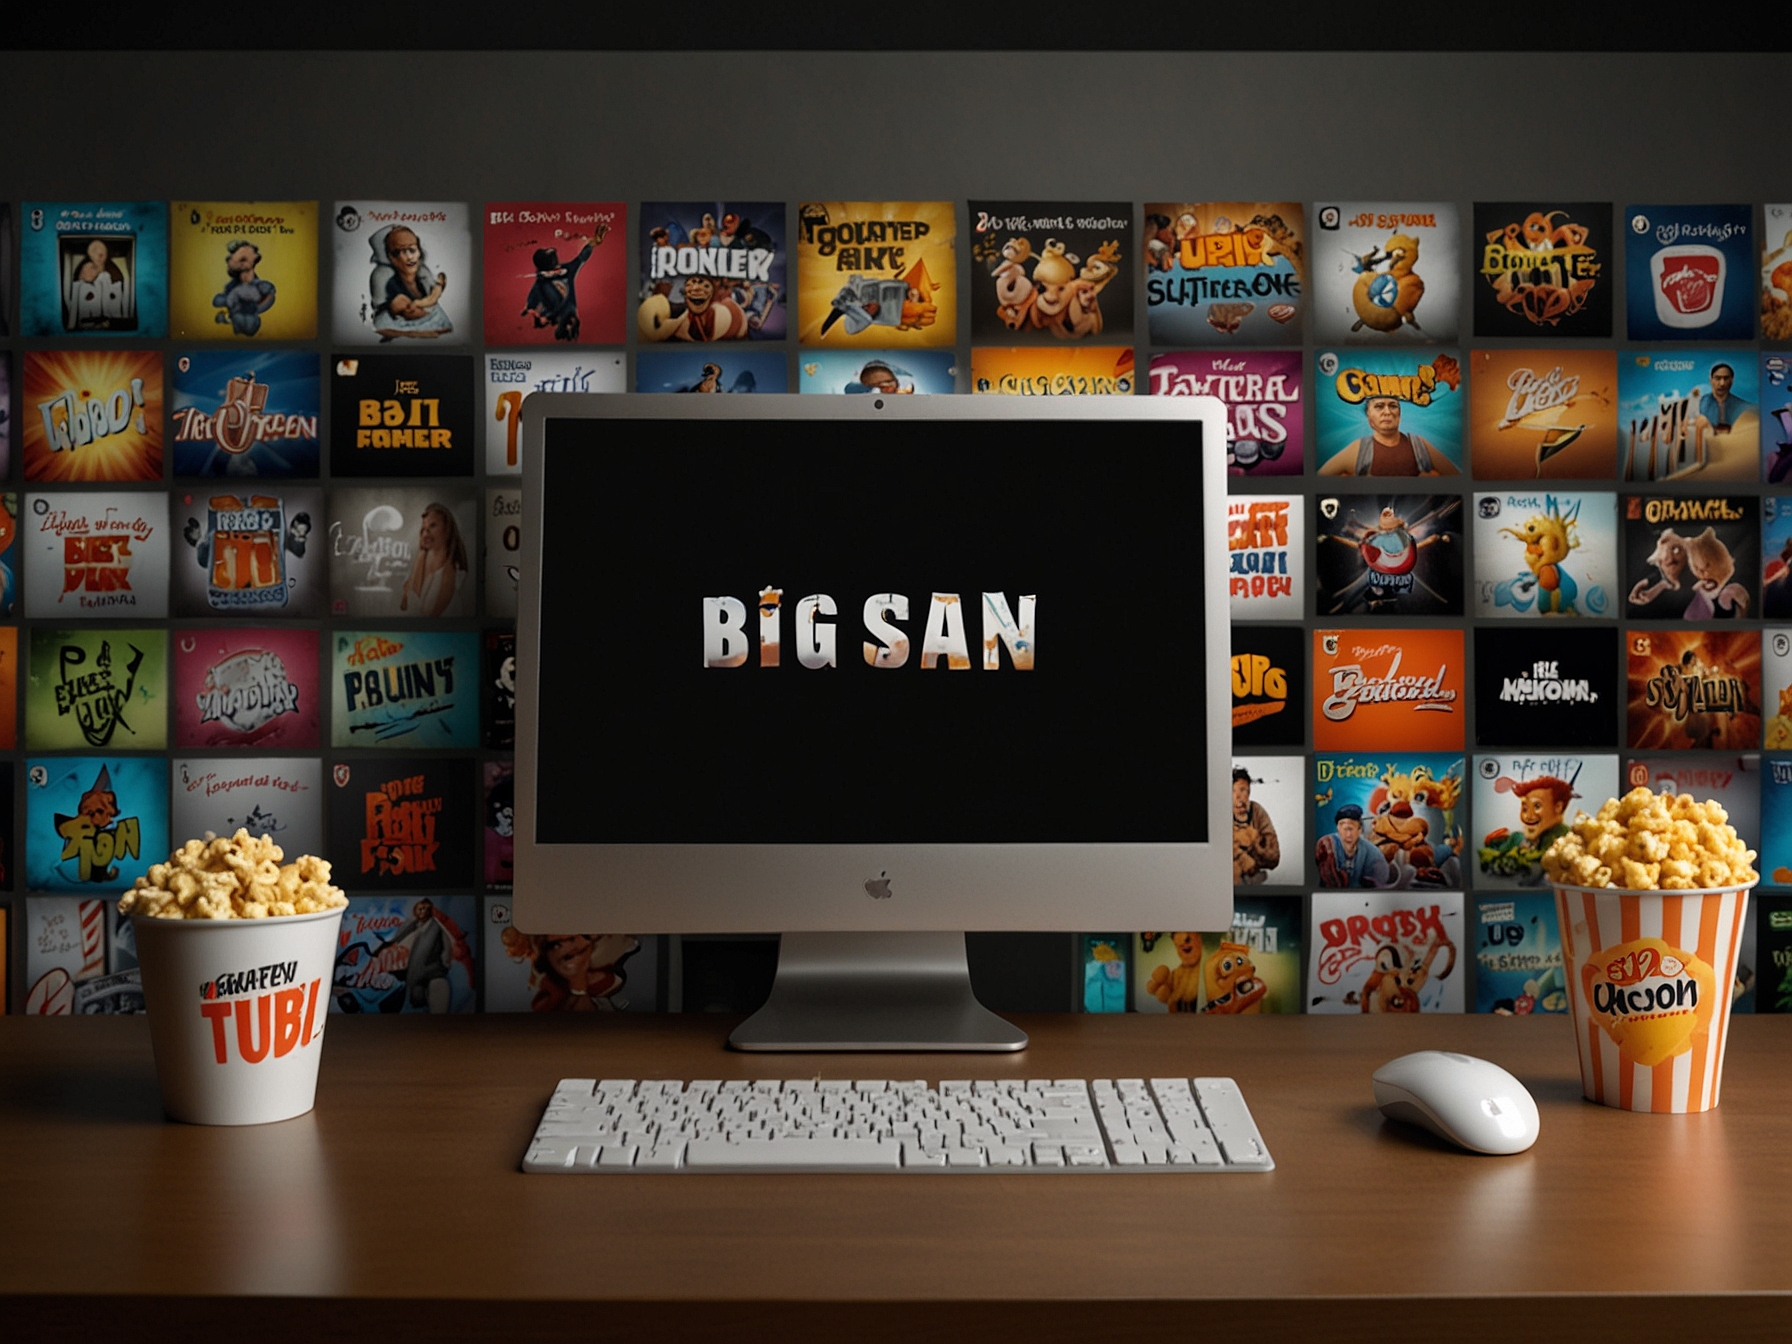 A screenshot of a computer screen displaying various legitimate streaming platforms like Tubi, Crackle, and Popcornflix where 'Big Stan' might be available for free viewing.